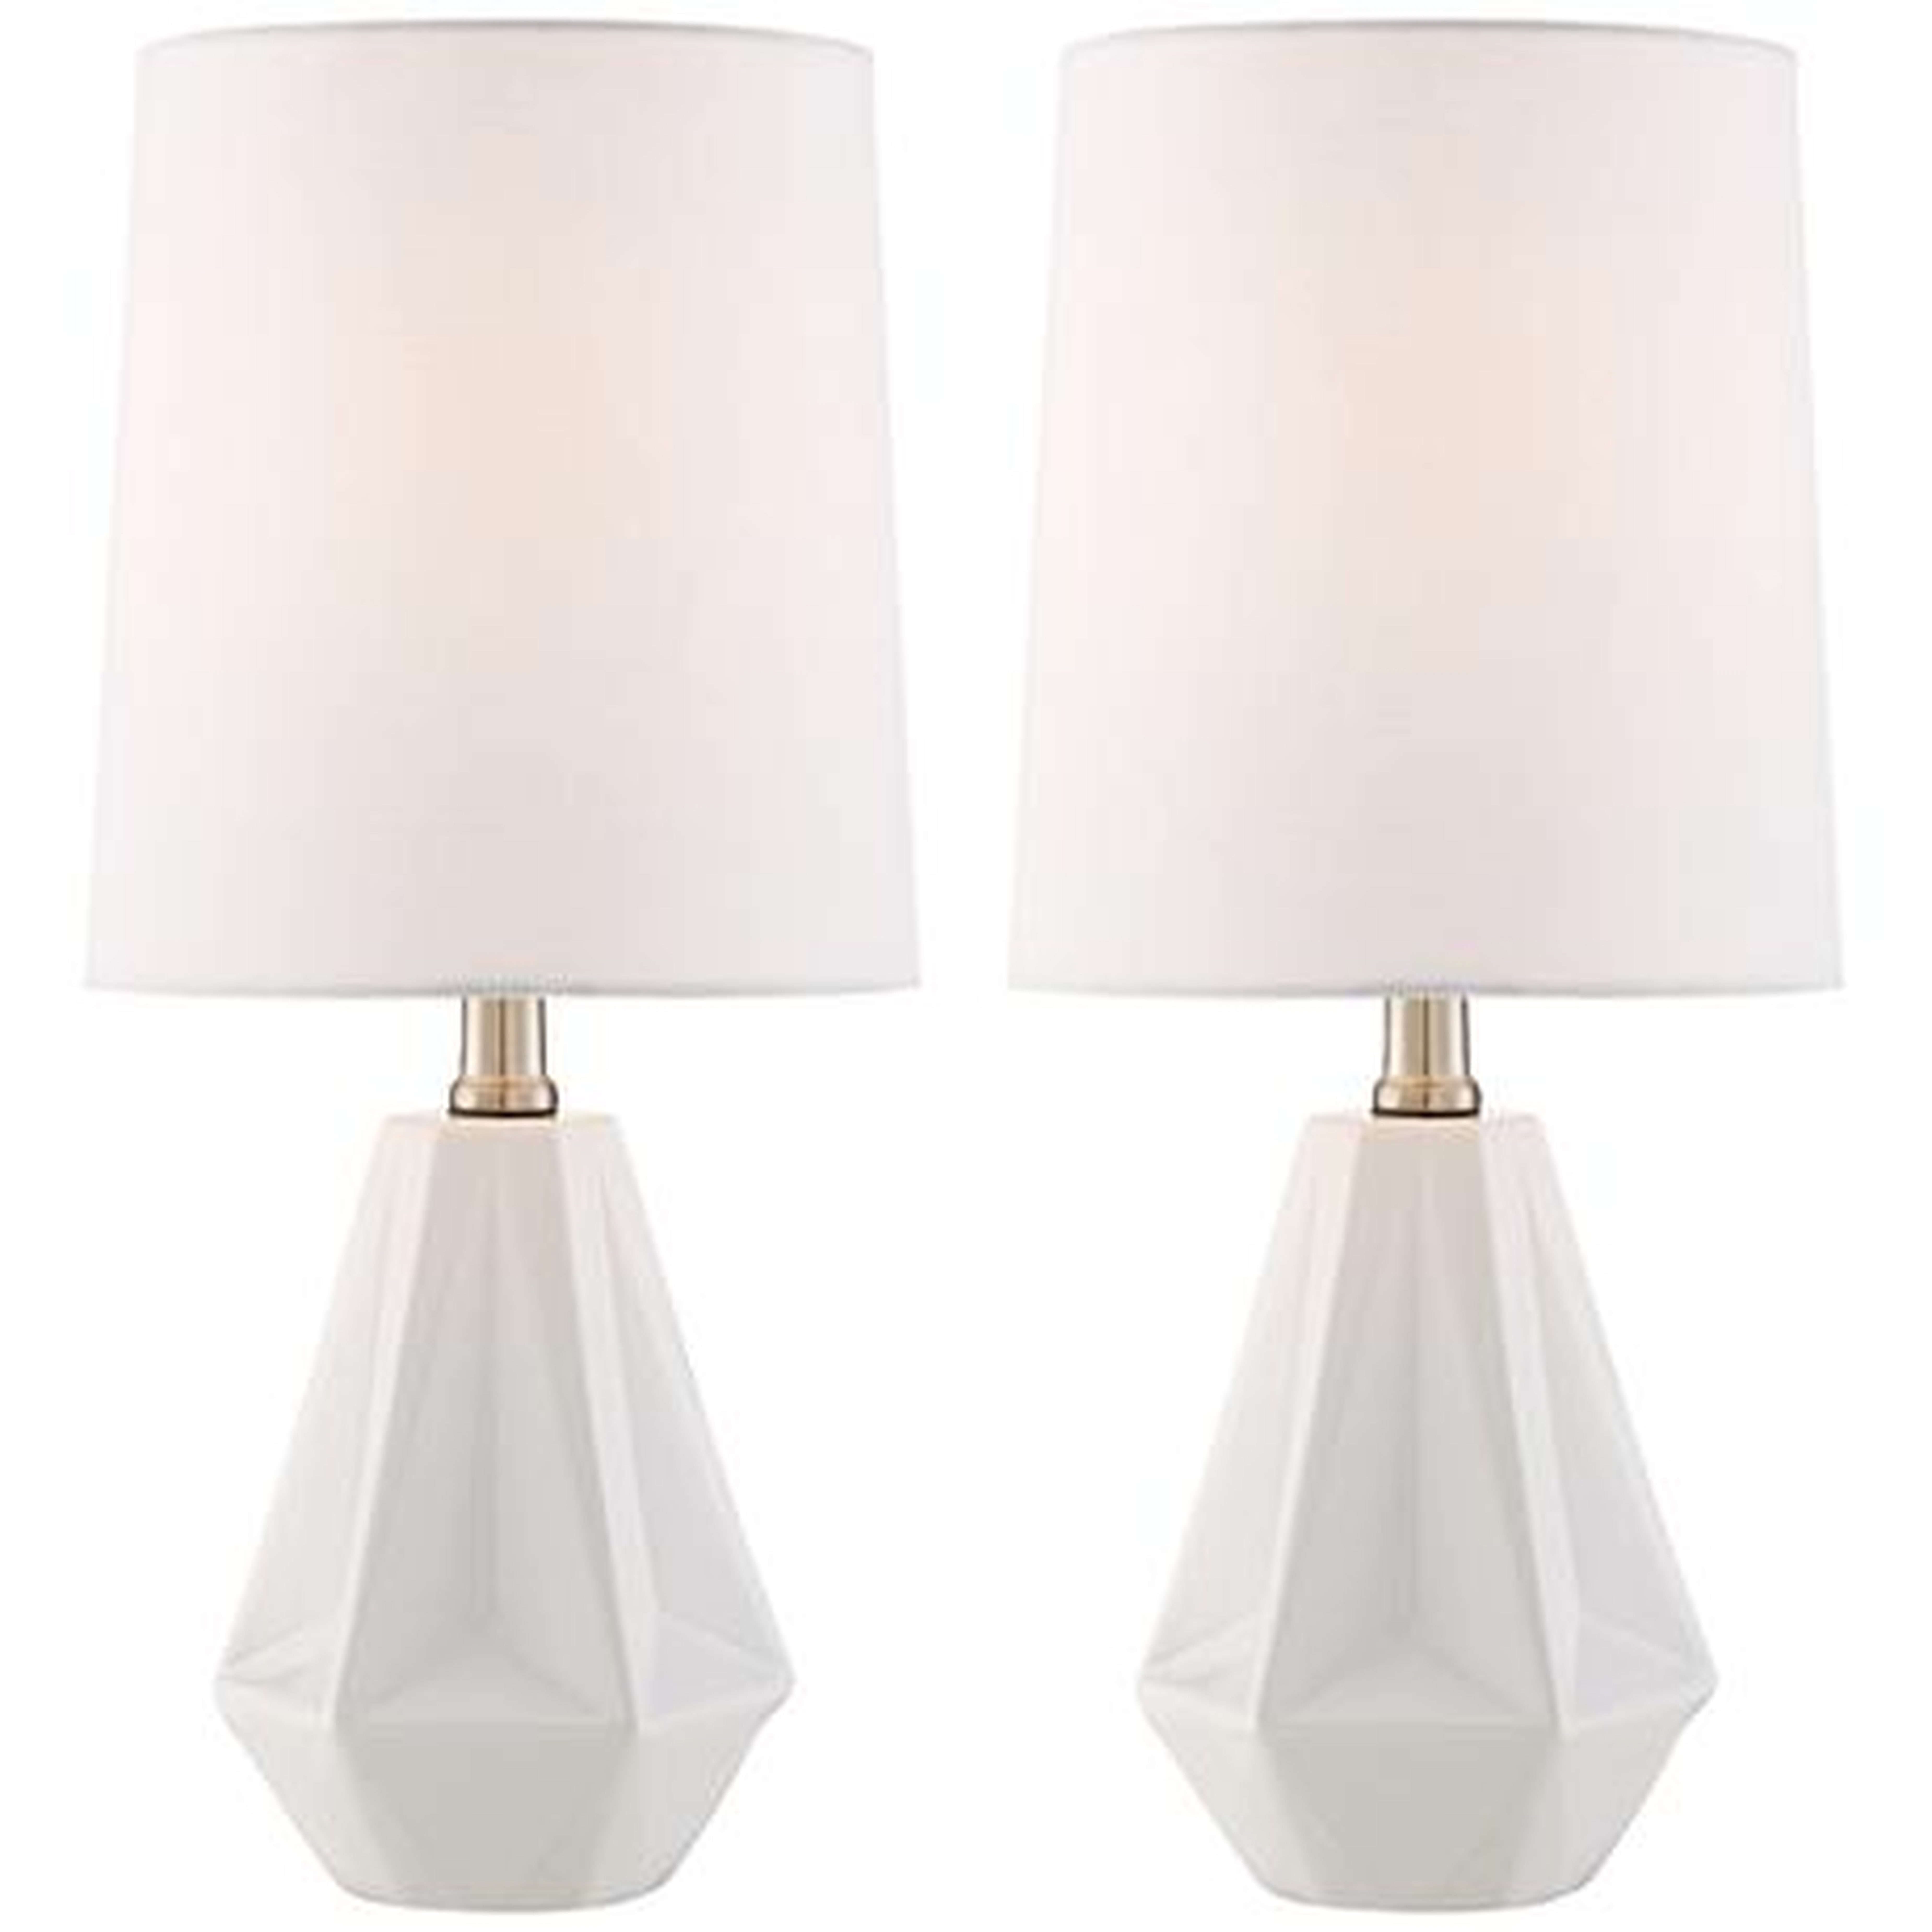 Colyn White Prism 17.5" Table Lamp - Set of 2 - Lamps Plus